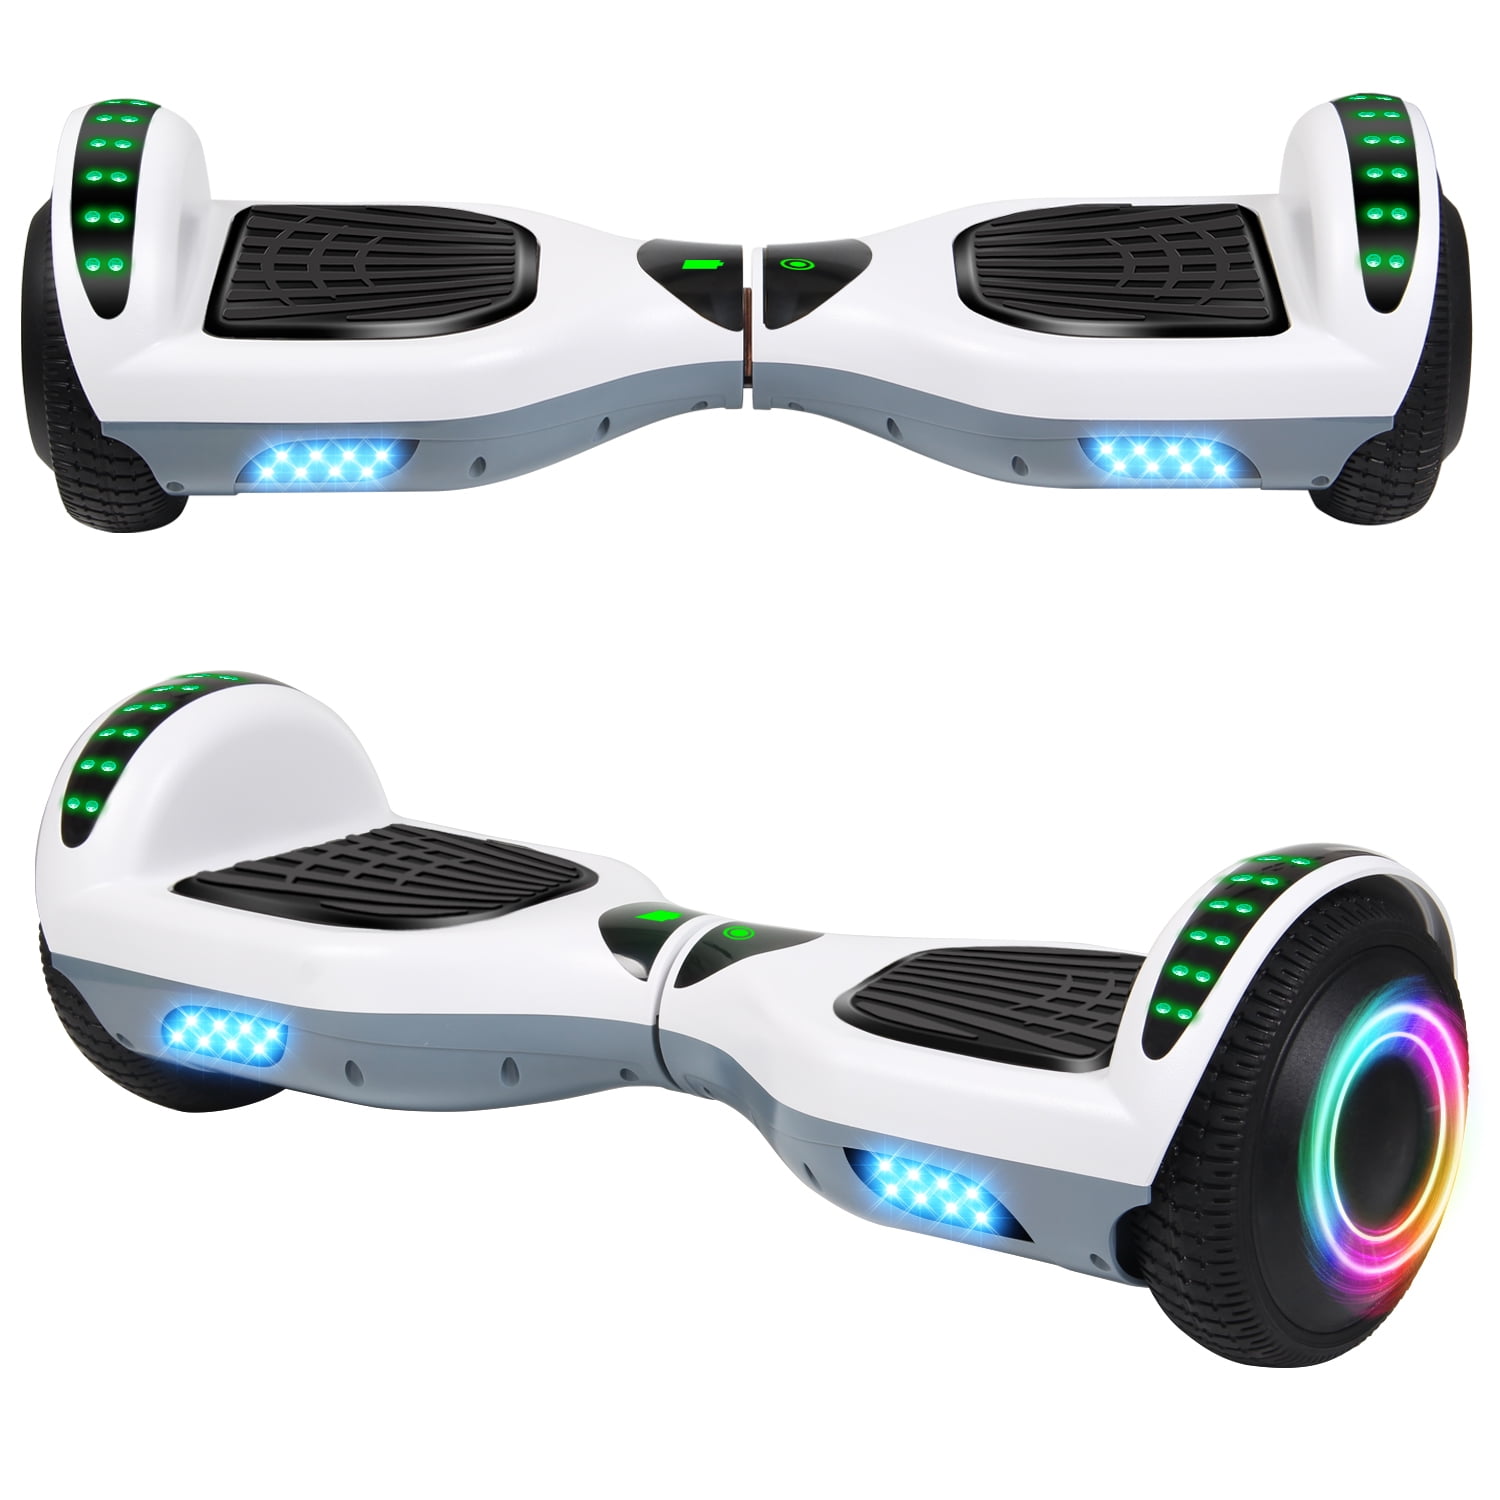 LIEAGLE Hoverboard Self Balancing Scooter Hover Board for Kids Adults with UL2272 Certified Wheels LED Lights 